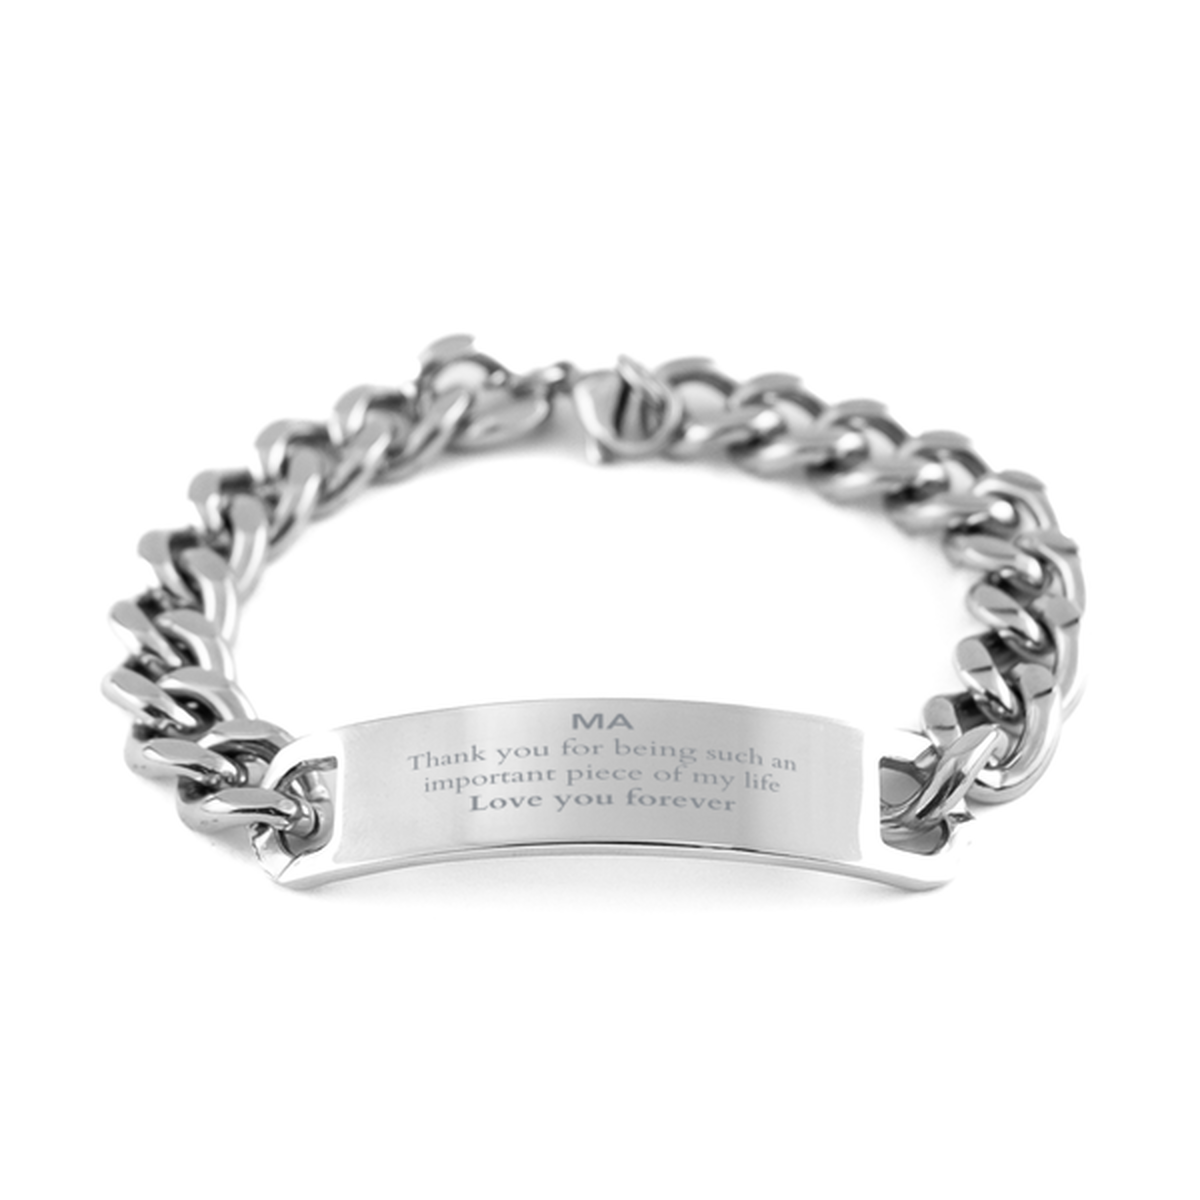 Appropriate Ma Cuban Chain Stainless Steel Bracelet Epic Birthday Gifts for Ma Thank you for being such an important piece of my life Ma Christmas Mothers Fathers Day